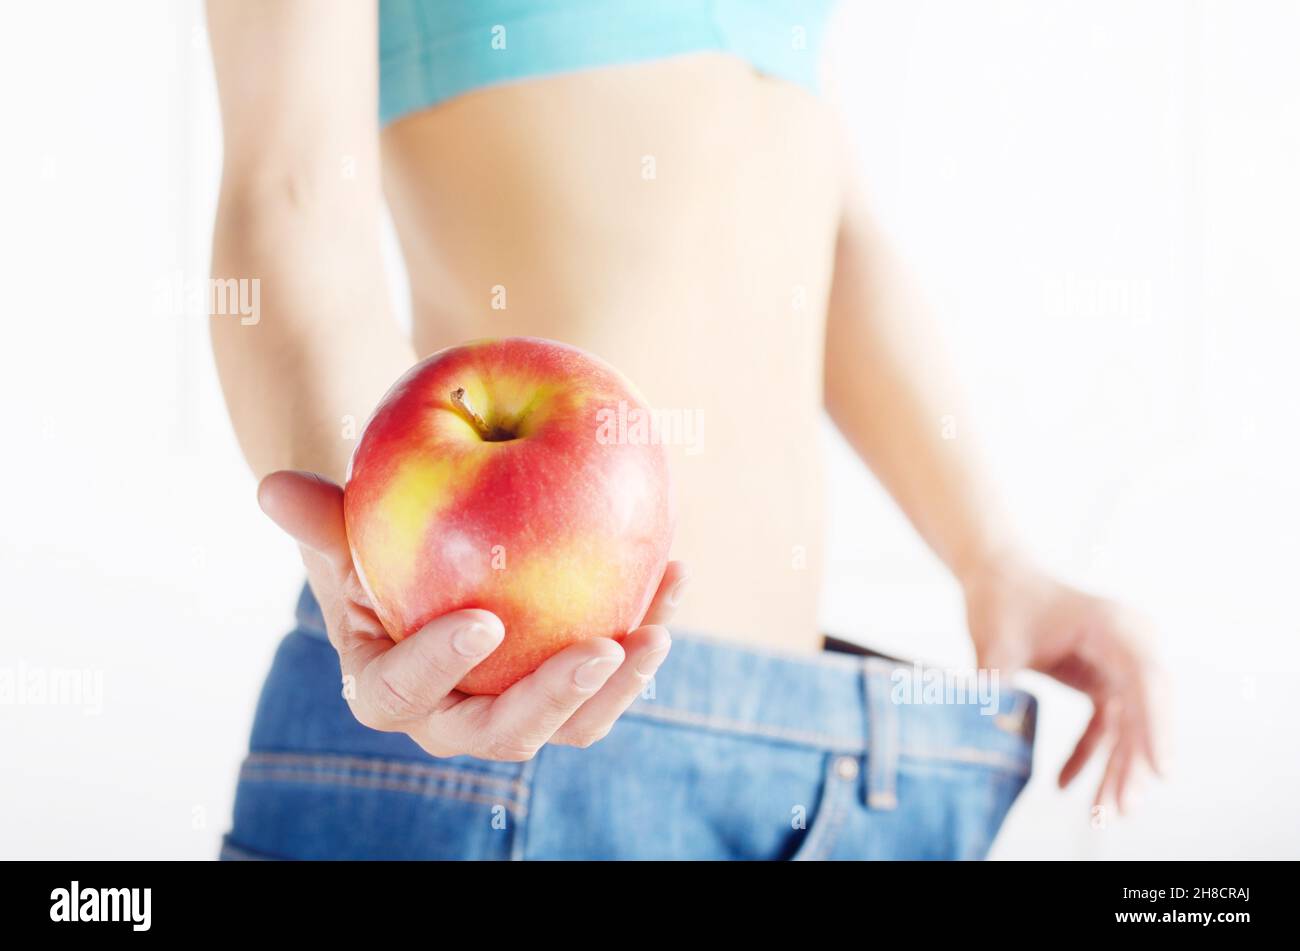 Caucasian female model in blue jeans with red apple showing her flat stomach. Healthy lifestyle and Weightloss concept. Stock Photo